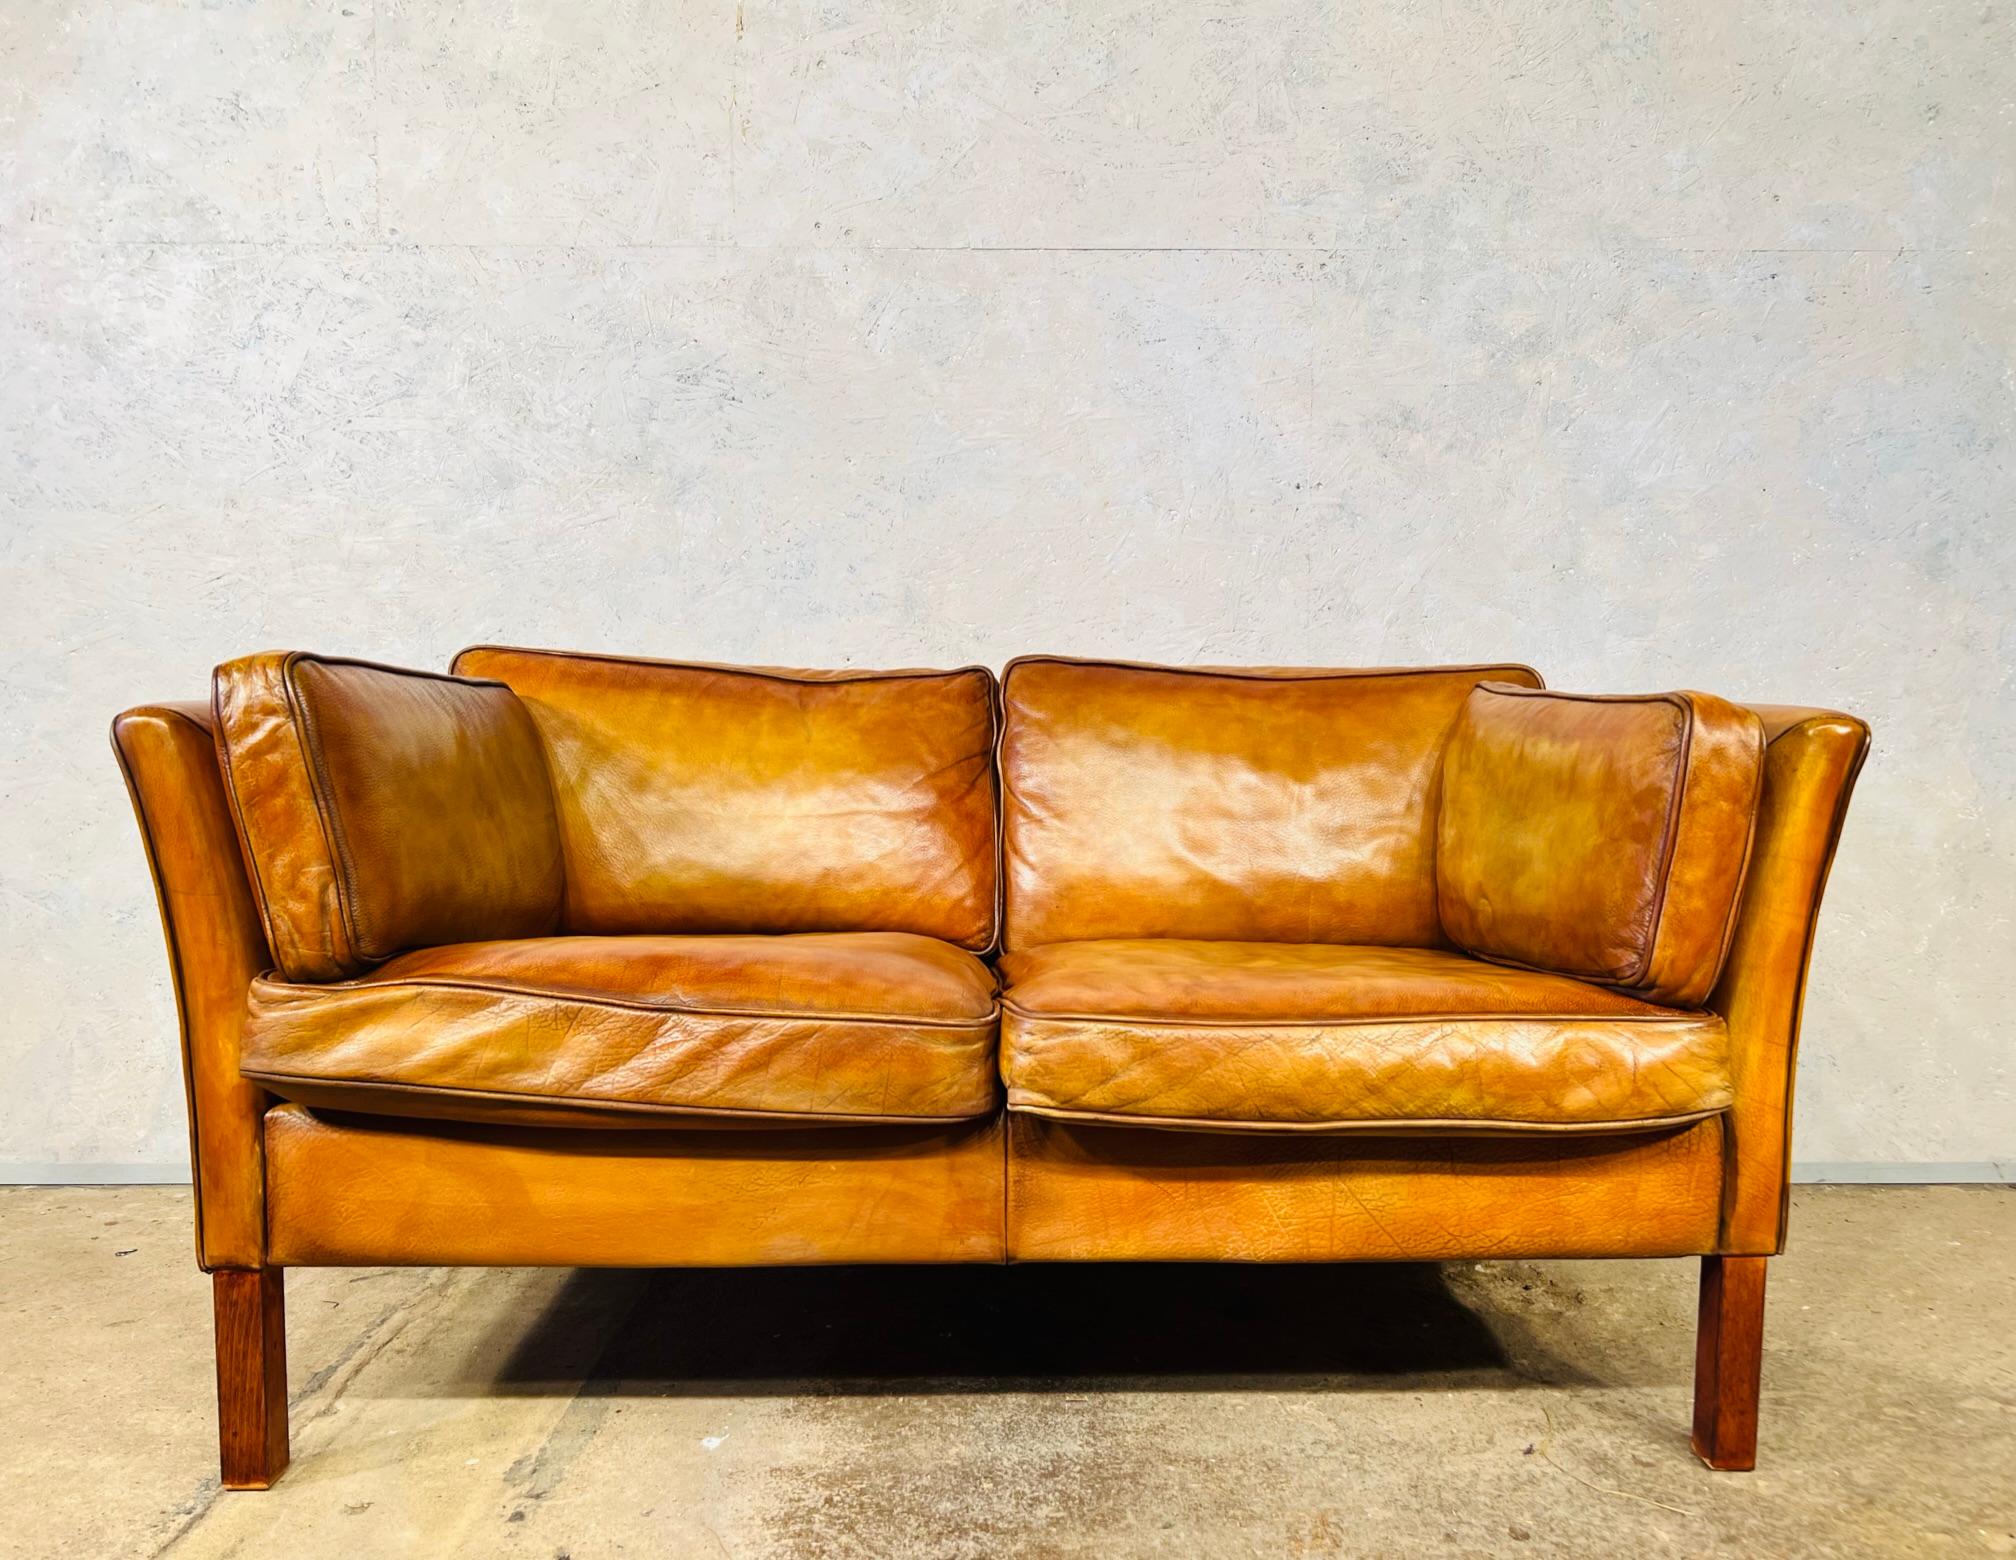 A Stylish Danish 1970s Sofa great design with beautiful lines, sits wonderfully.

Stunning hand dyed tan colour, great patina and finish.

Viewings welcome at our showroom in Lewes, East Sussex, UK.

